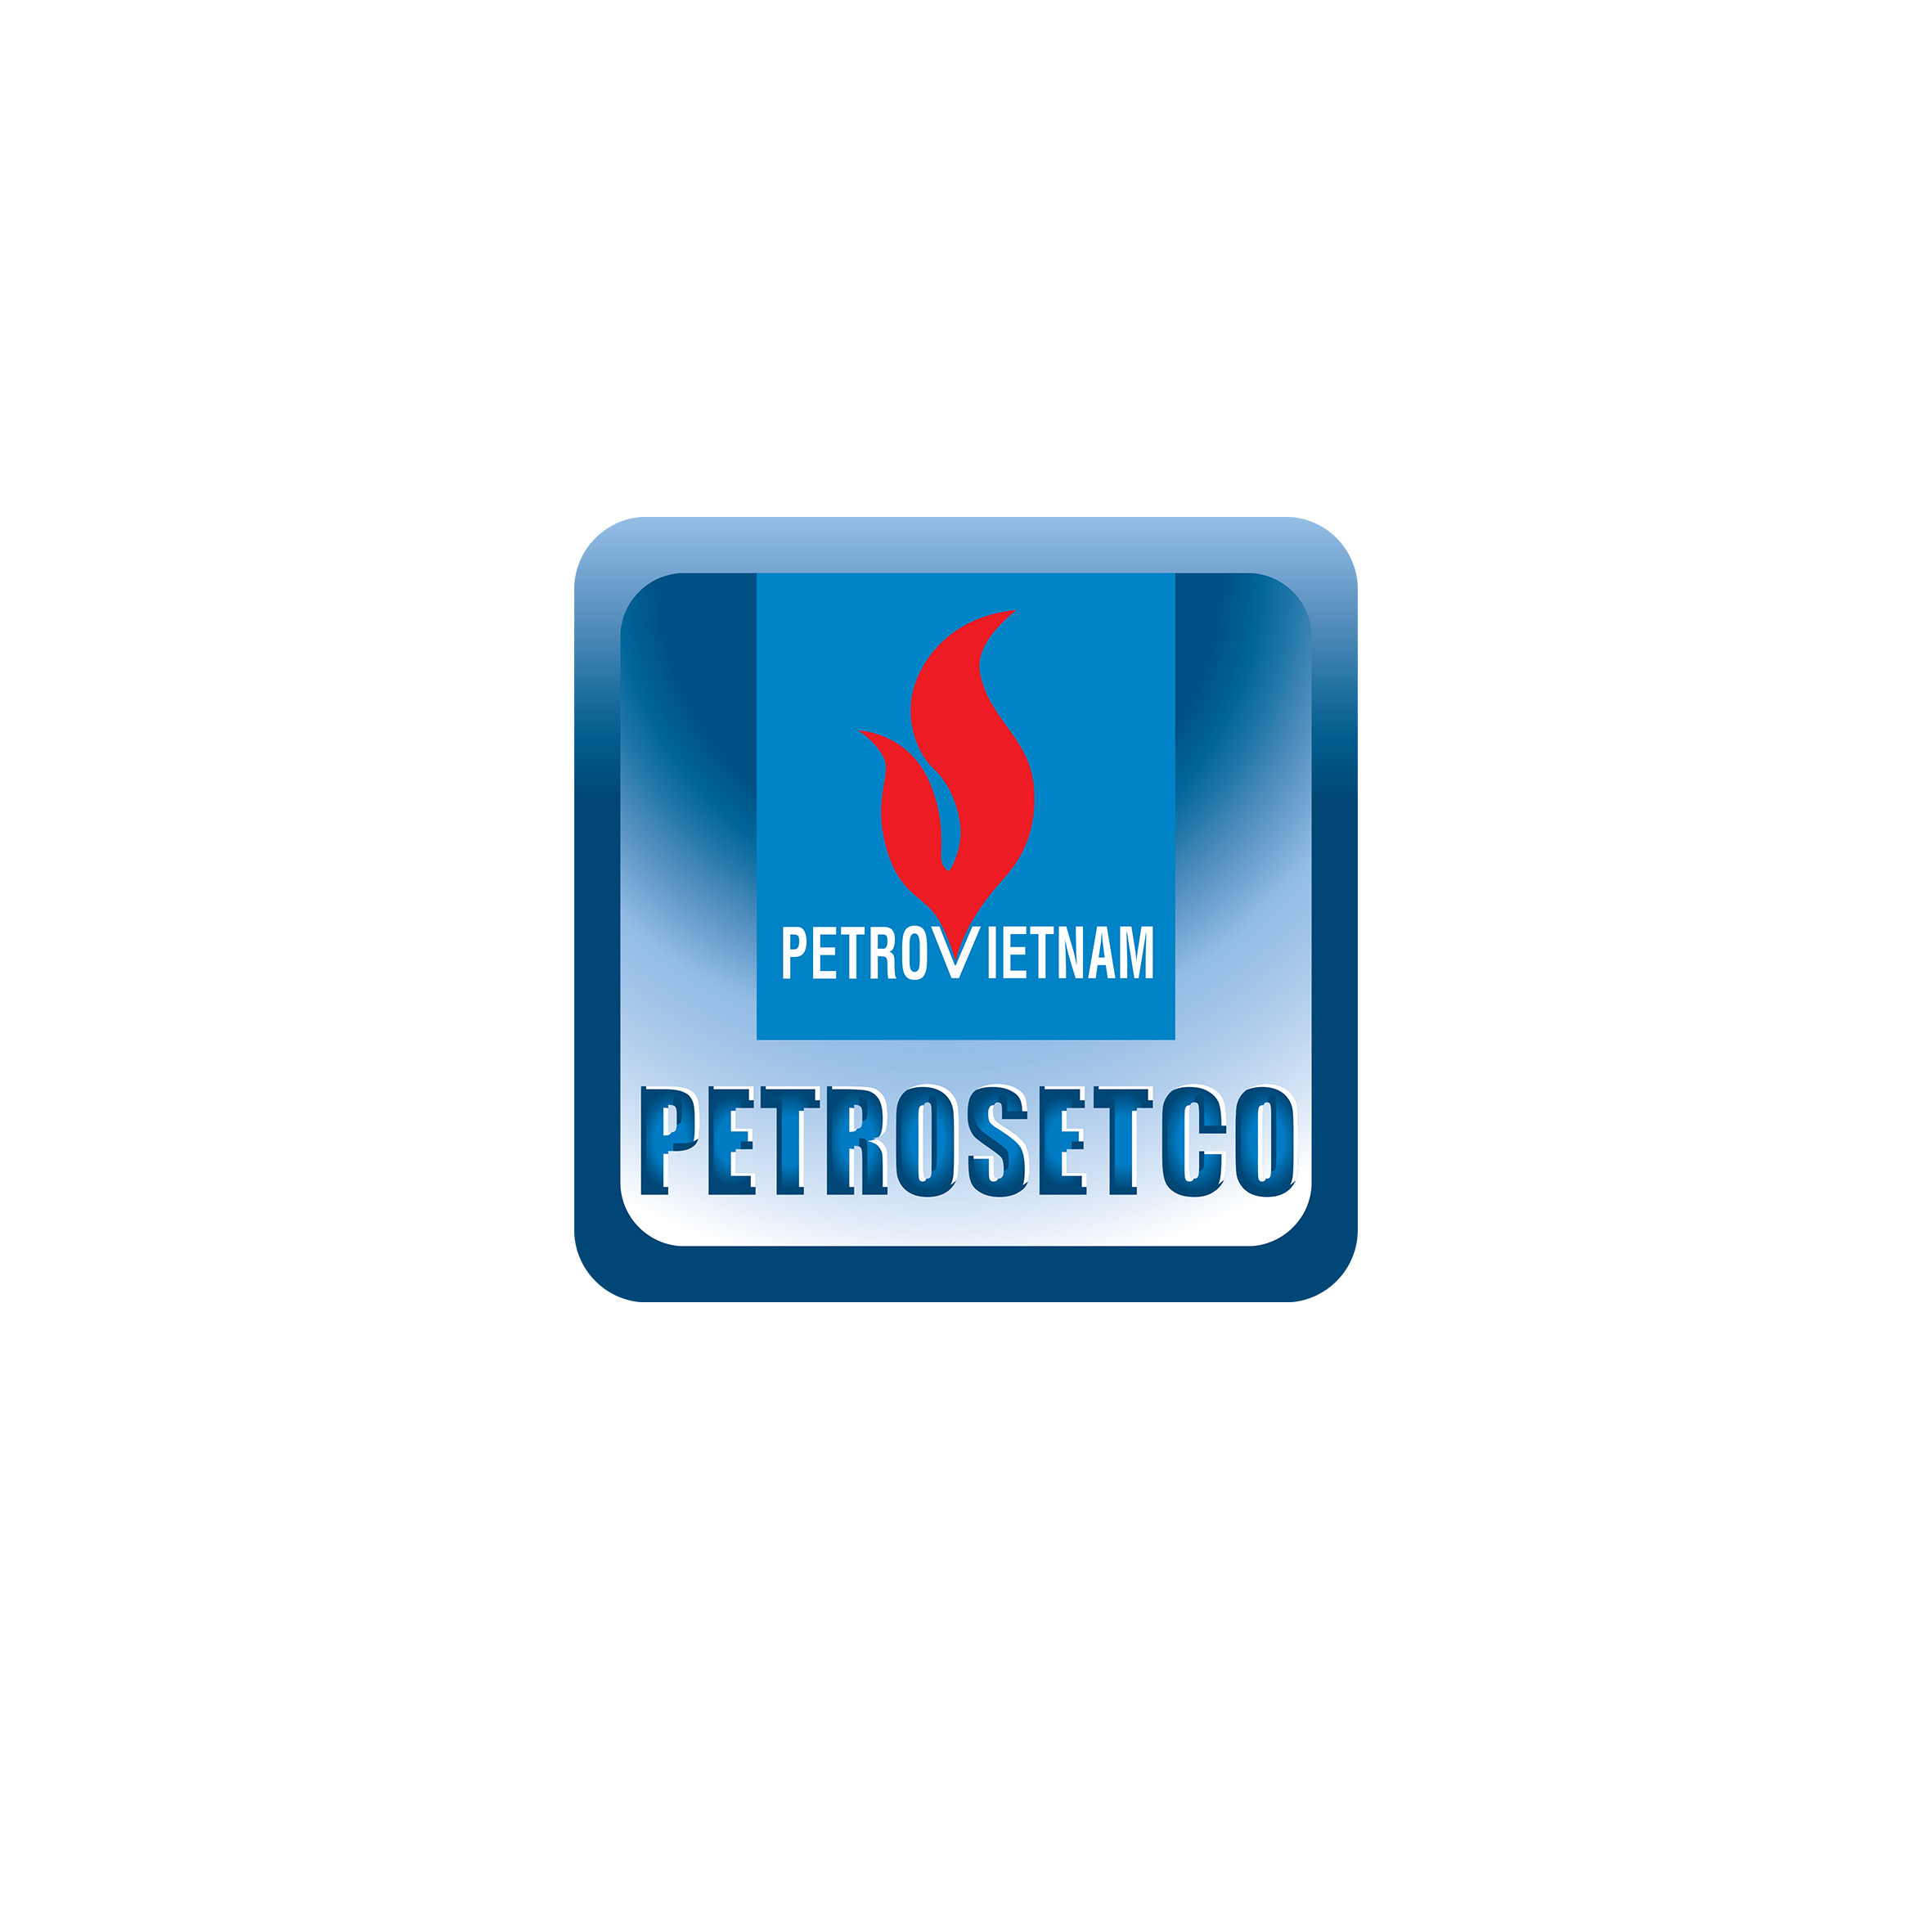 PETROSETCO DEPLOYS THE PLAN TO ISSUE NEARLY 54 MILLION SHARES TO INCREASE CHARTER CAPITAL